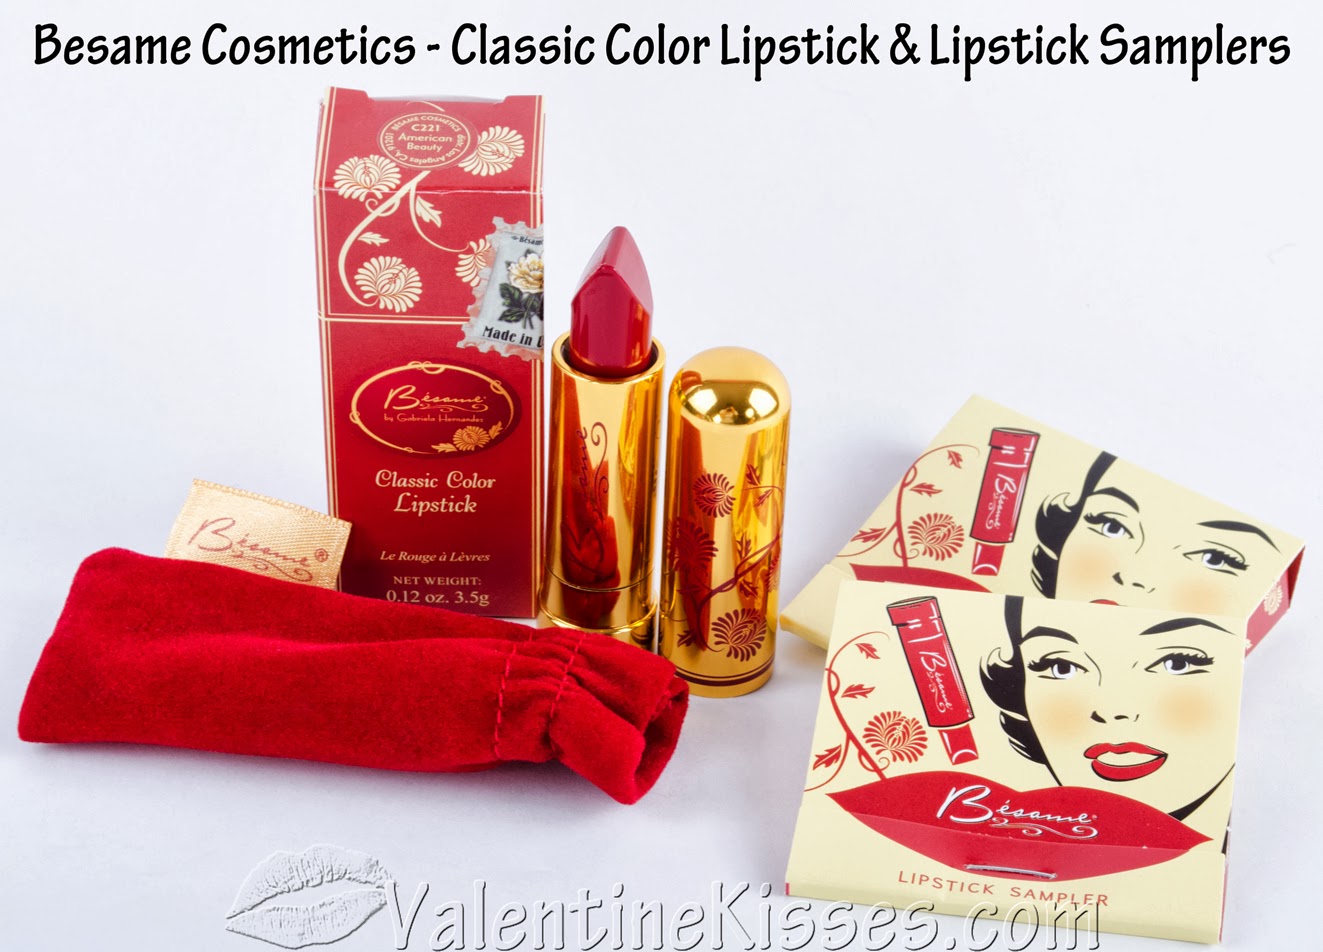 Valentine Kisses: Besame Cosmetics Classic Color Lipstick & Lipstick  Samplers - 5 shades - pics, swatches, review